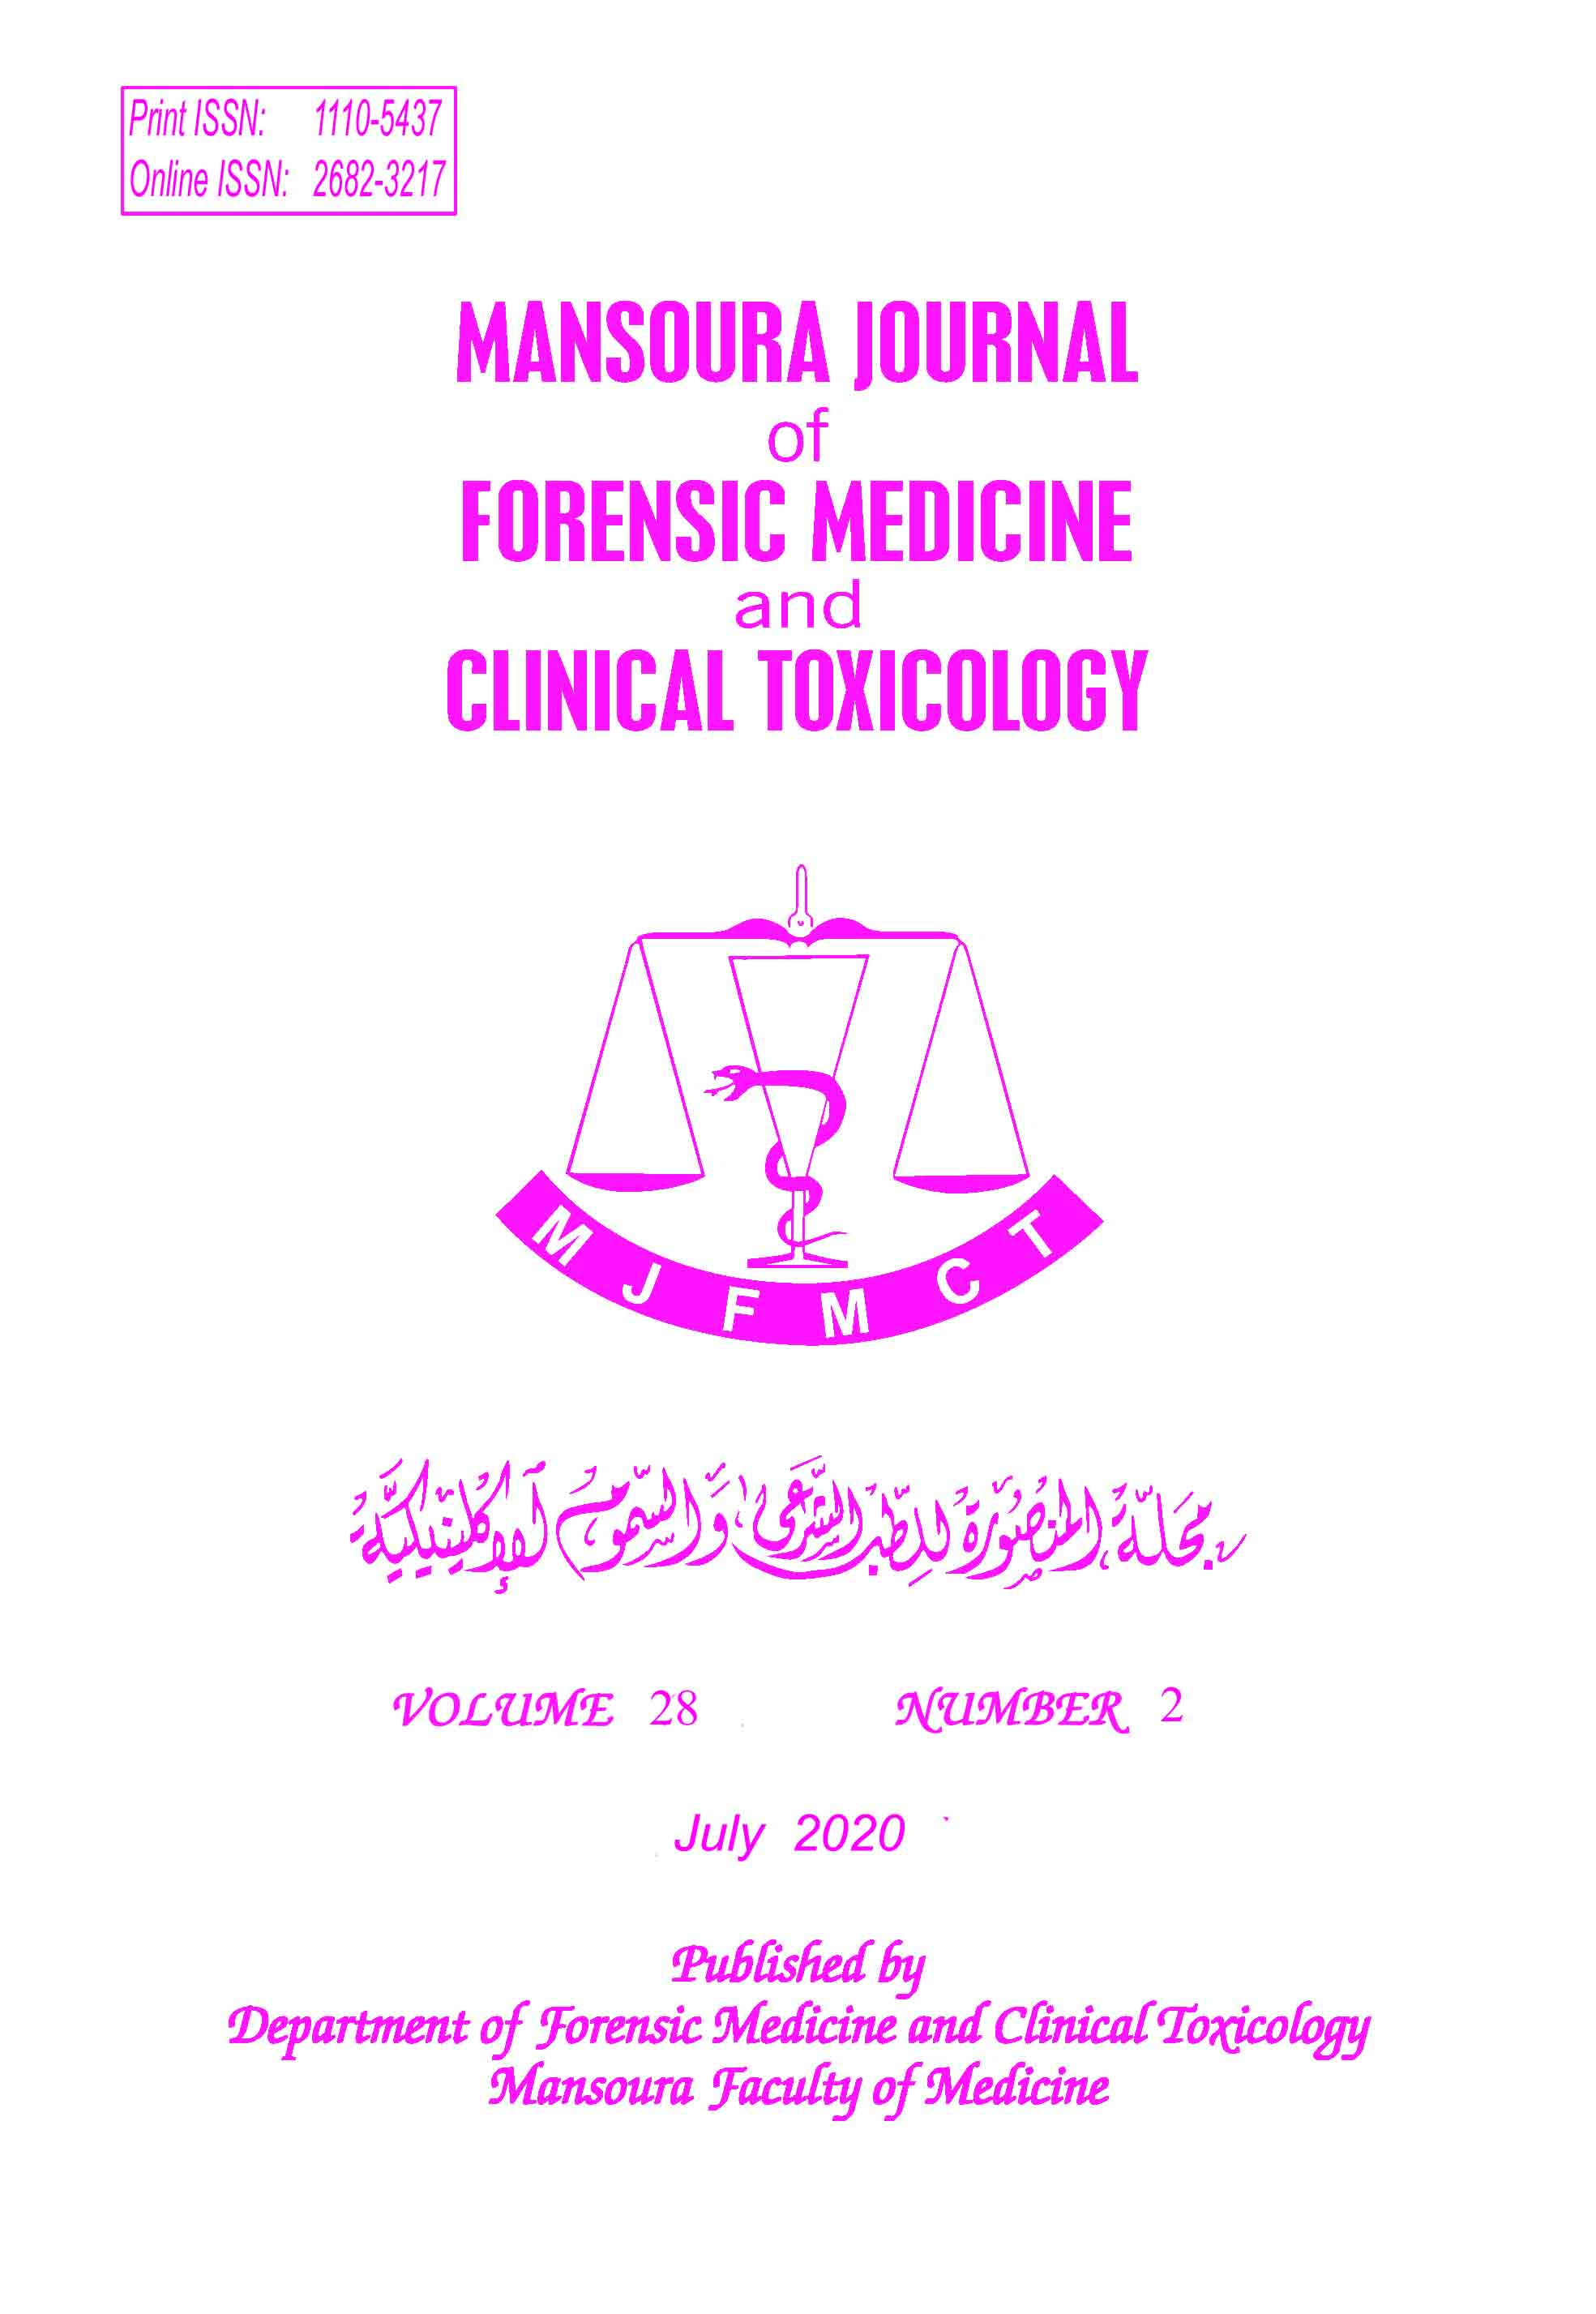 Mansoura Journal of Forensic Medicine and Clinical Toxicology